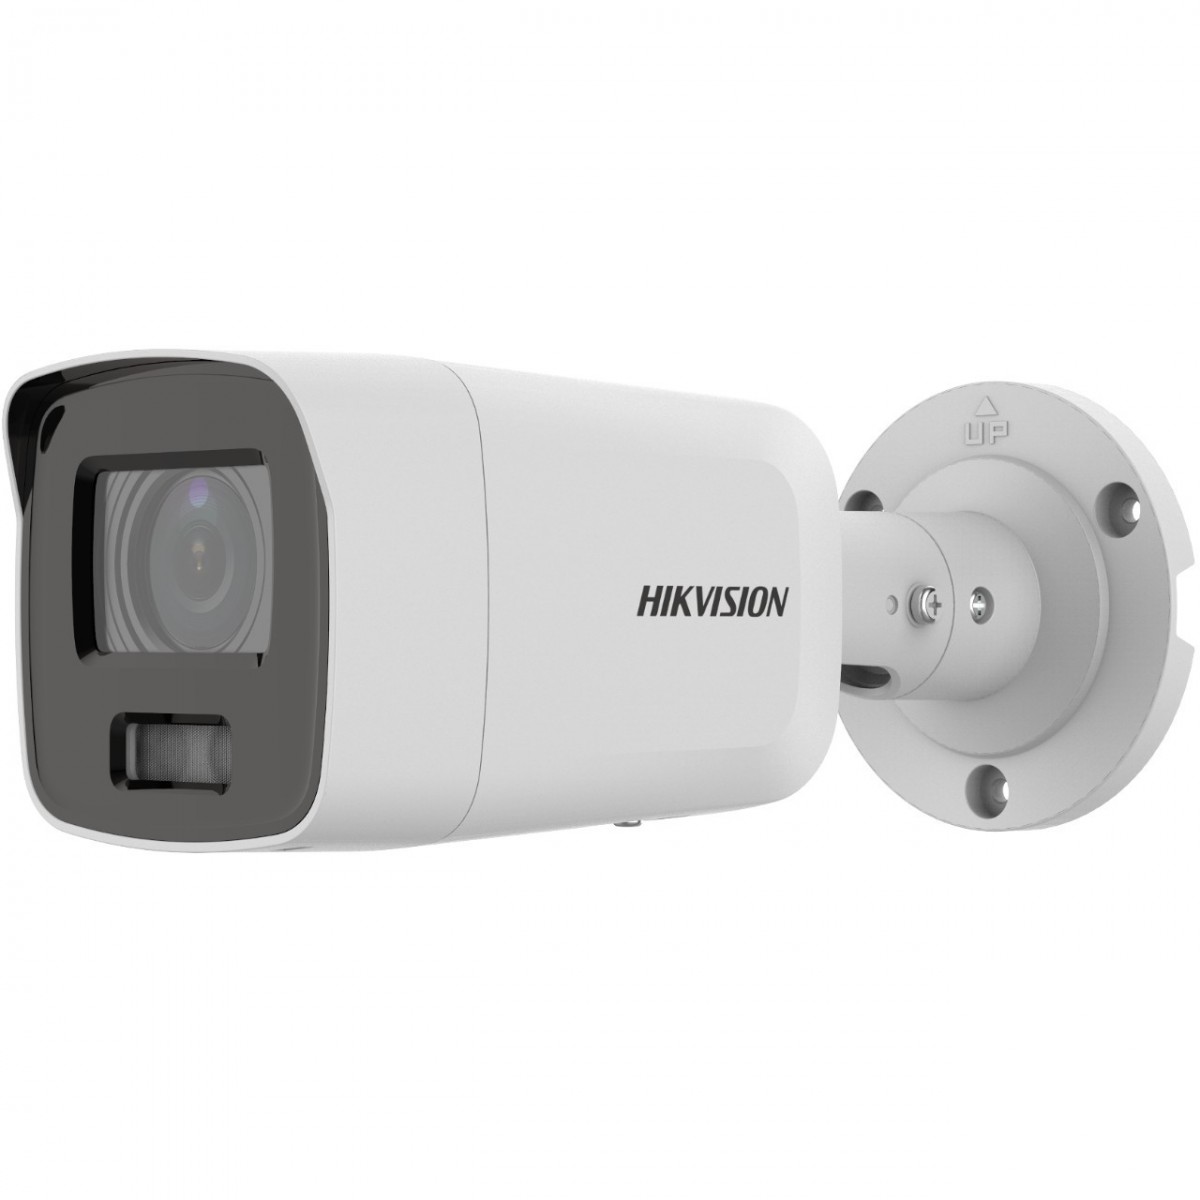 Hikvision Digital Technology DS-2CD2087G2-LU(2.8MM) - IP security camera - Outdoor - Wired - Multi - Class B FCC SDoC (47 CFR Pa